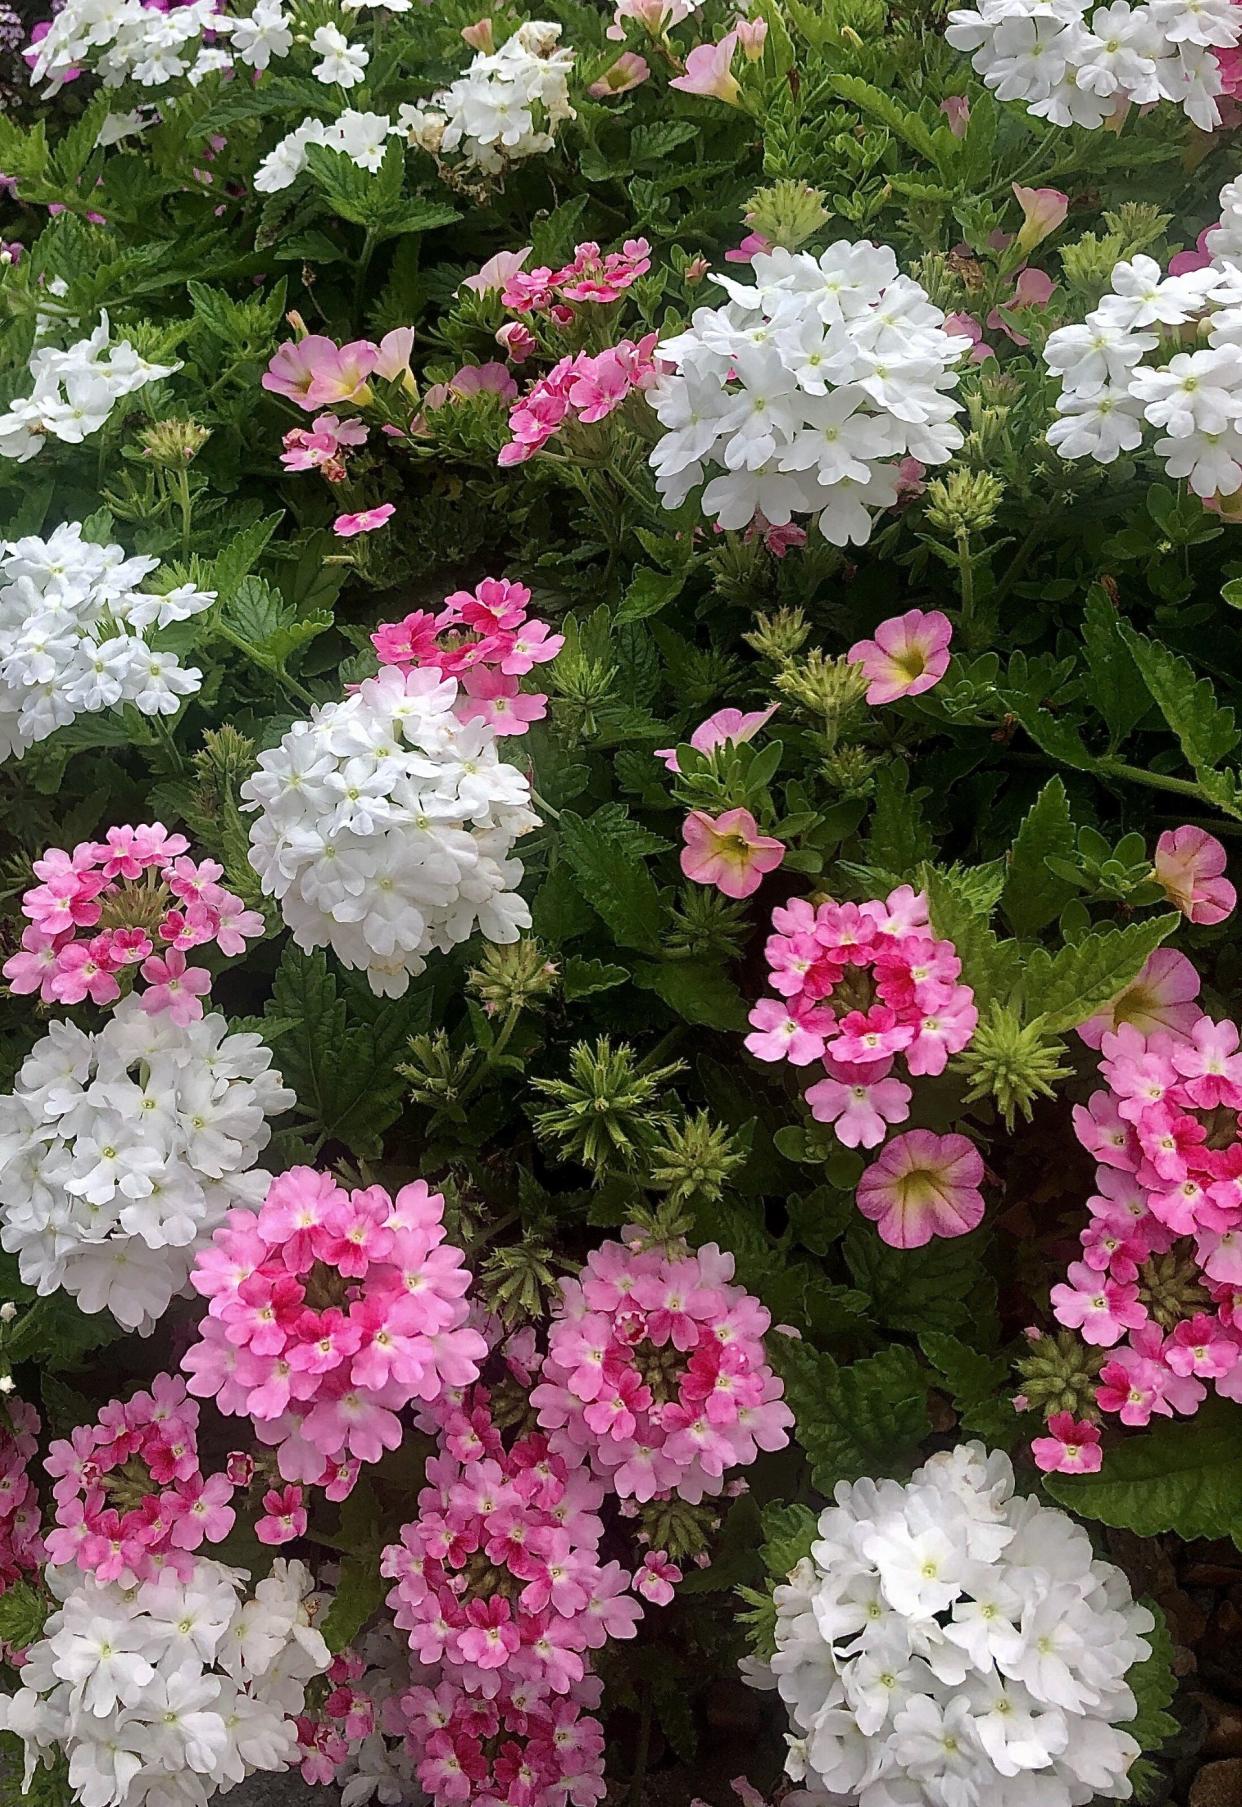 This Proven Winners recipe called Missy was seen showing out at a recent Young’s Plant Farm Annual Garden Tour in Auburn AL. It features Superbenas Sparkling Rose and Whiteout verbenas and Superbells Honey calibrachoa.